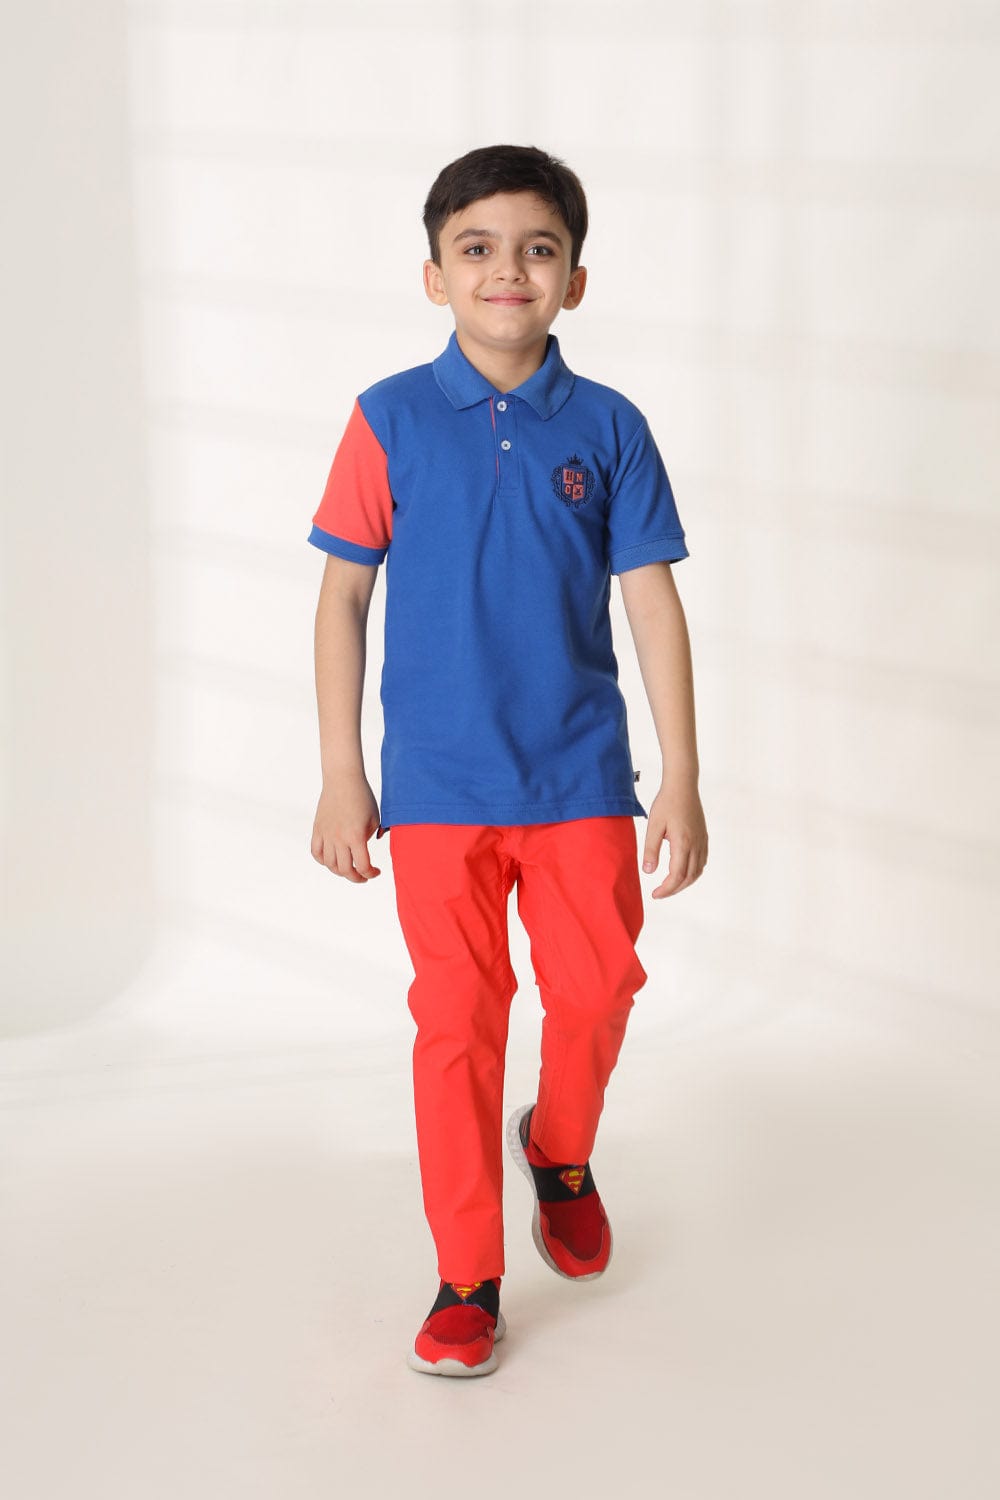 Hope Not Out by Shahid Afridi Boys Knit Polo Shirt Blue Polo With Embroidered Logo